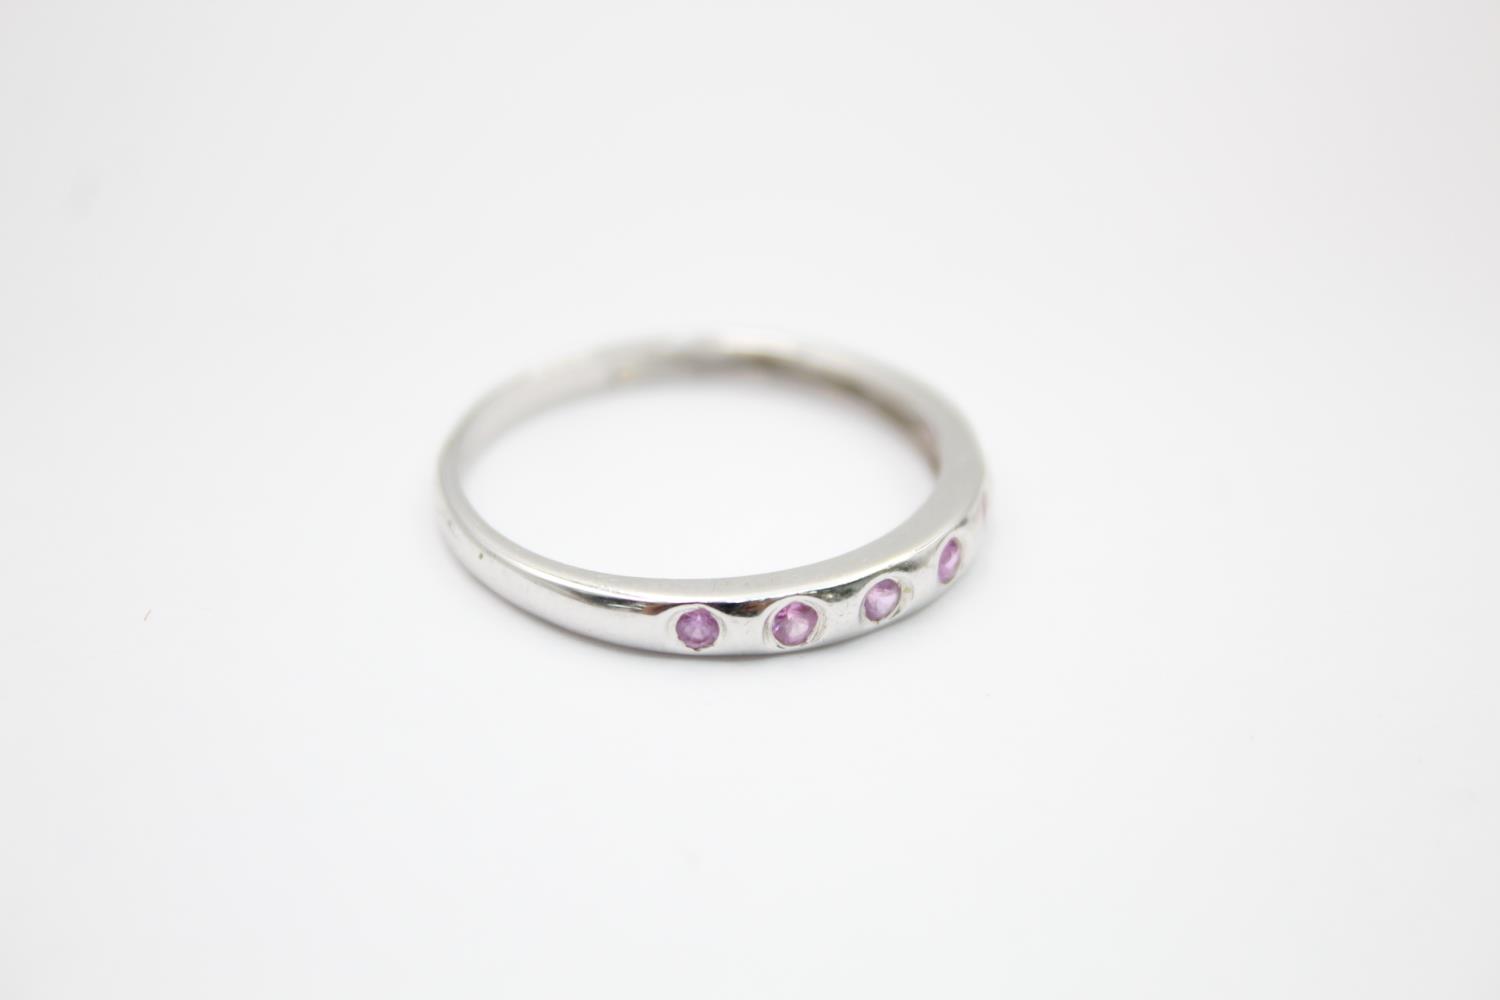 9ct white gold spink sapphire half eternity band ring (2g) Size V - Image 2 of 4